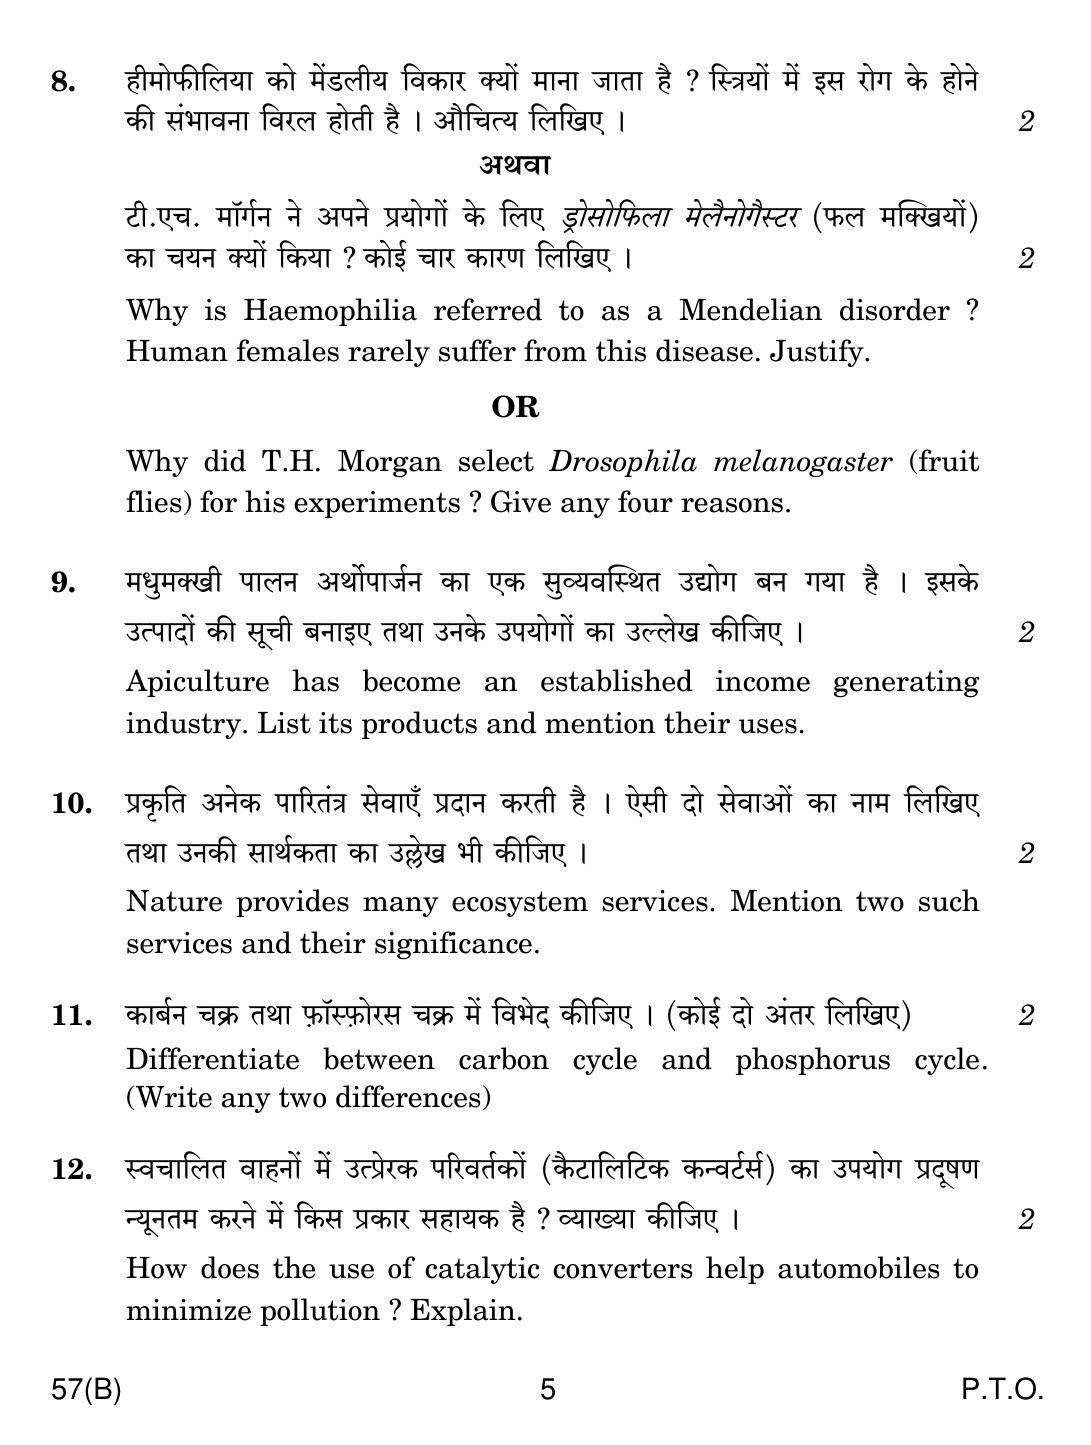 CBSE Class 12 57(B) BIOLOGY 2019 Compartment Question Paper - Page 5